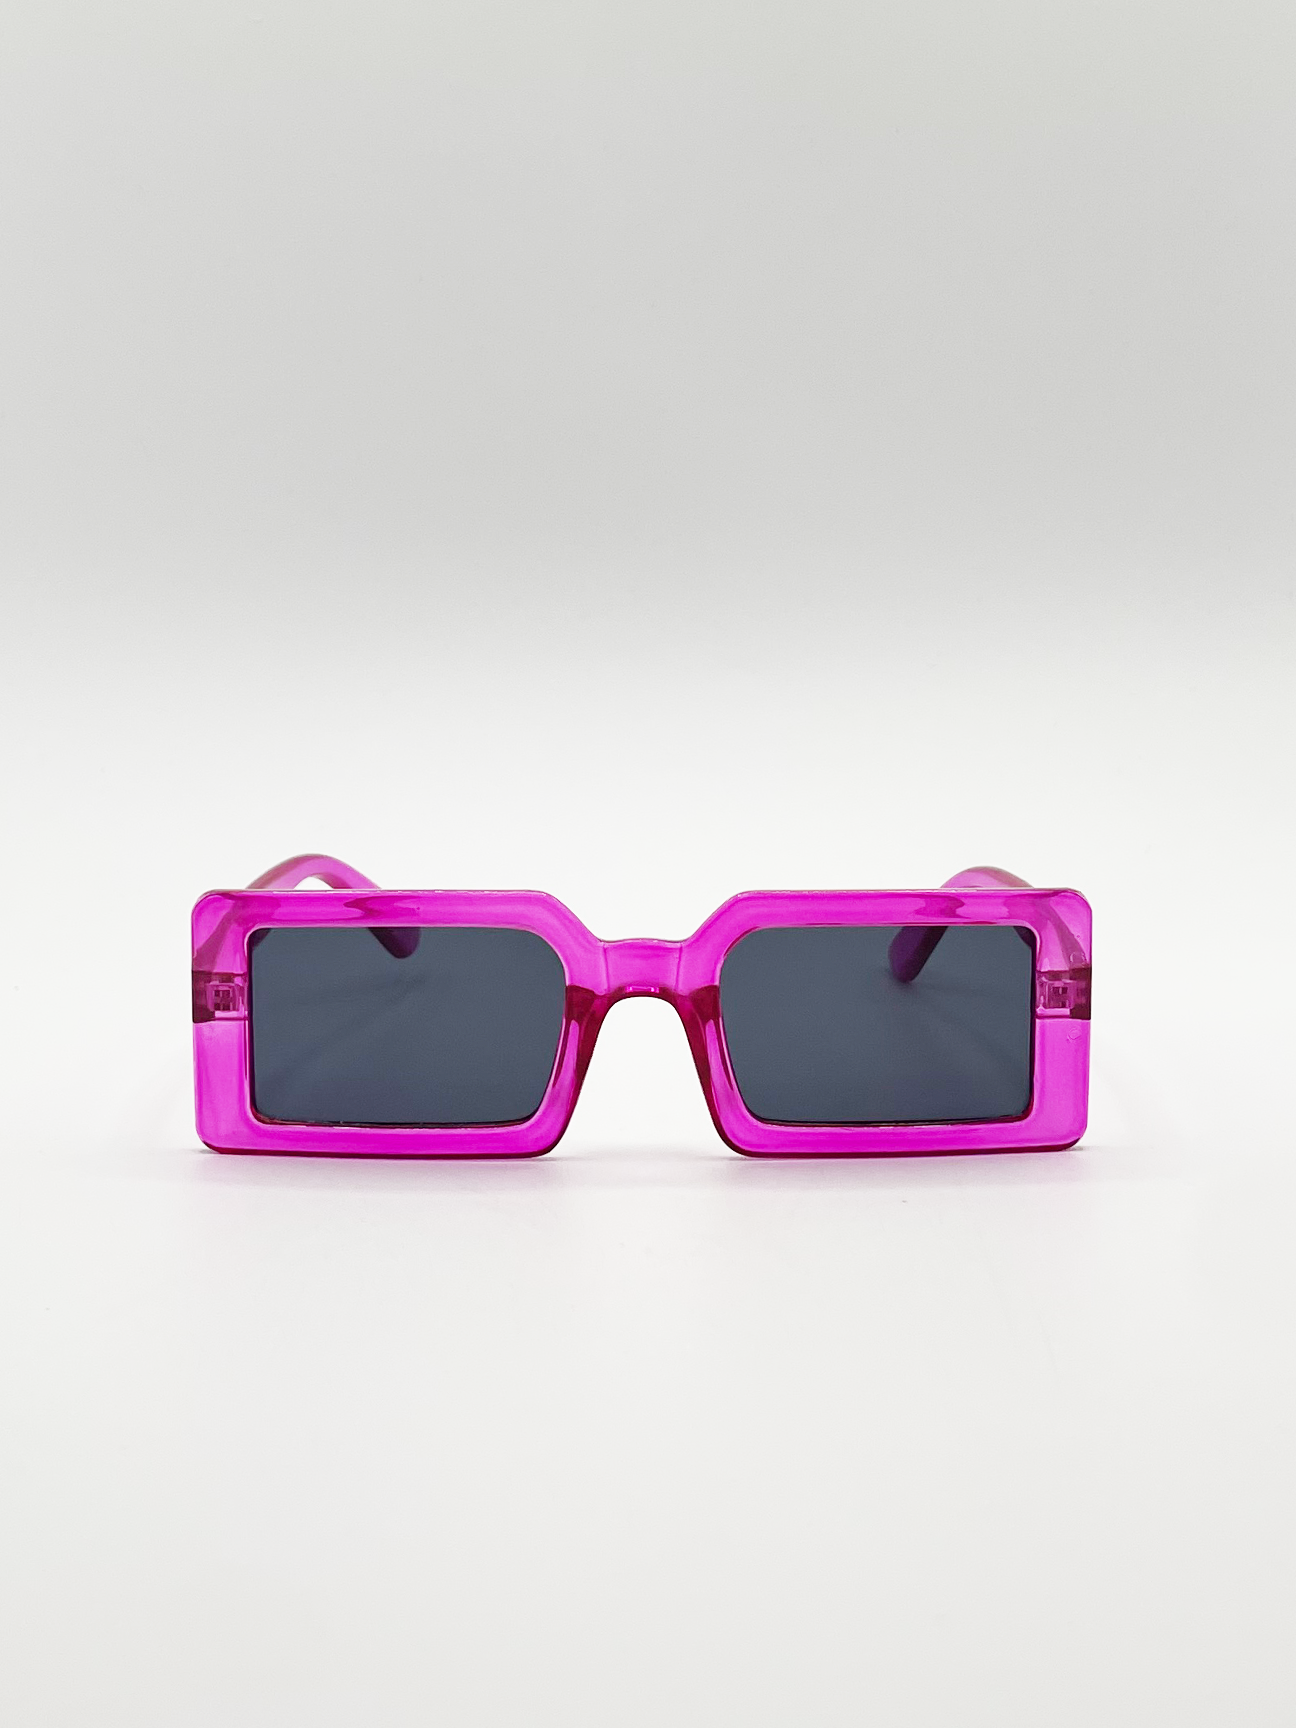 Square Frame Sunglasses in Hot Pink with Black Lens